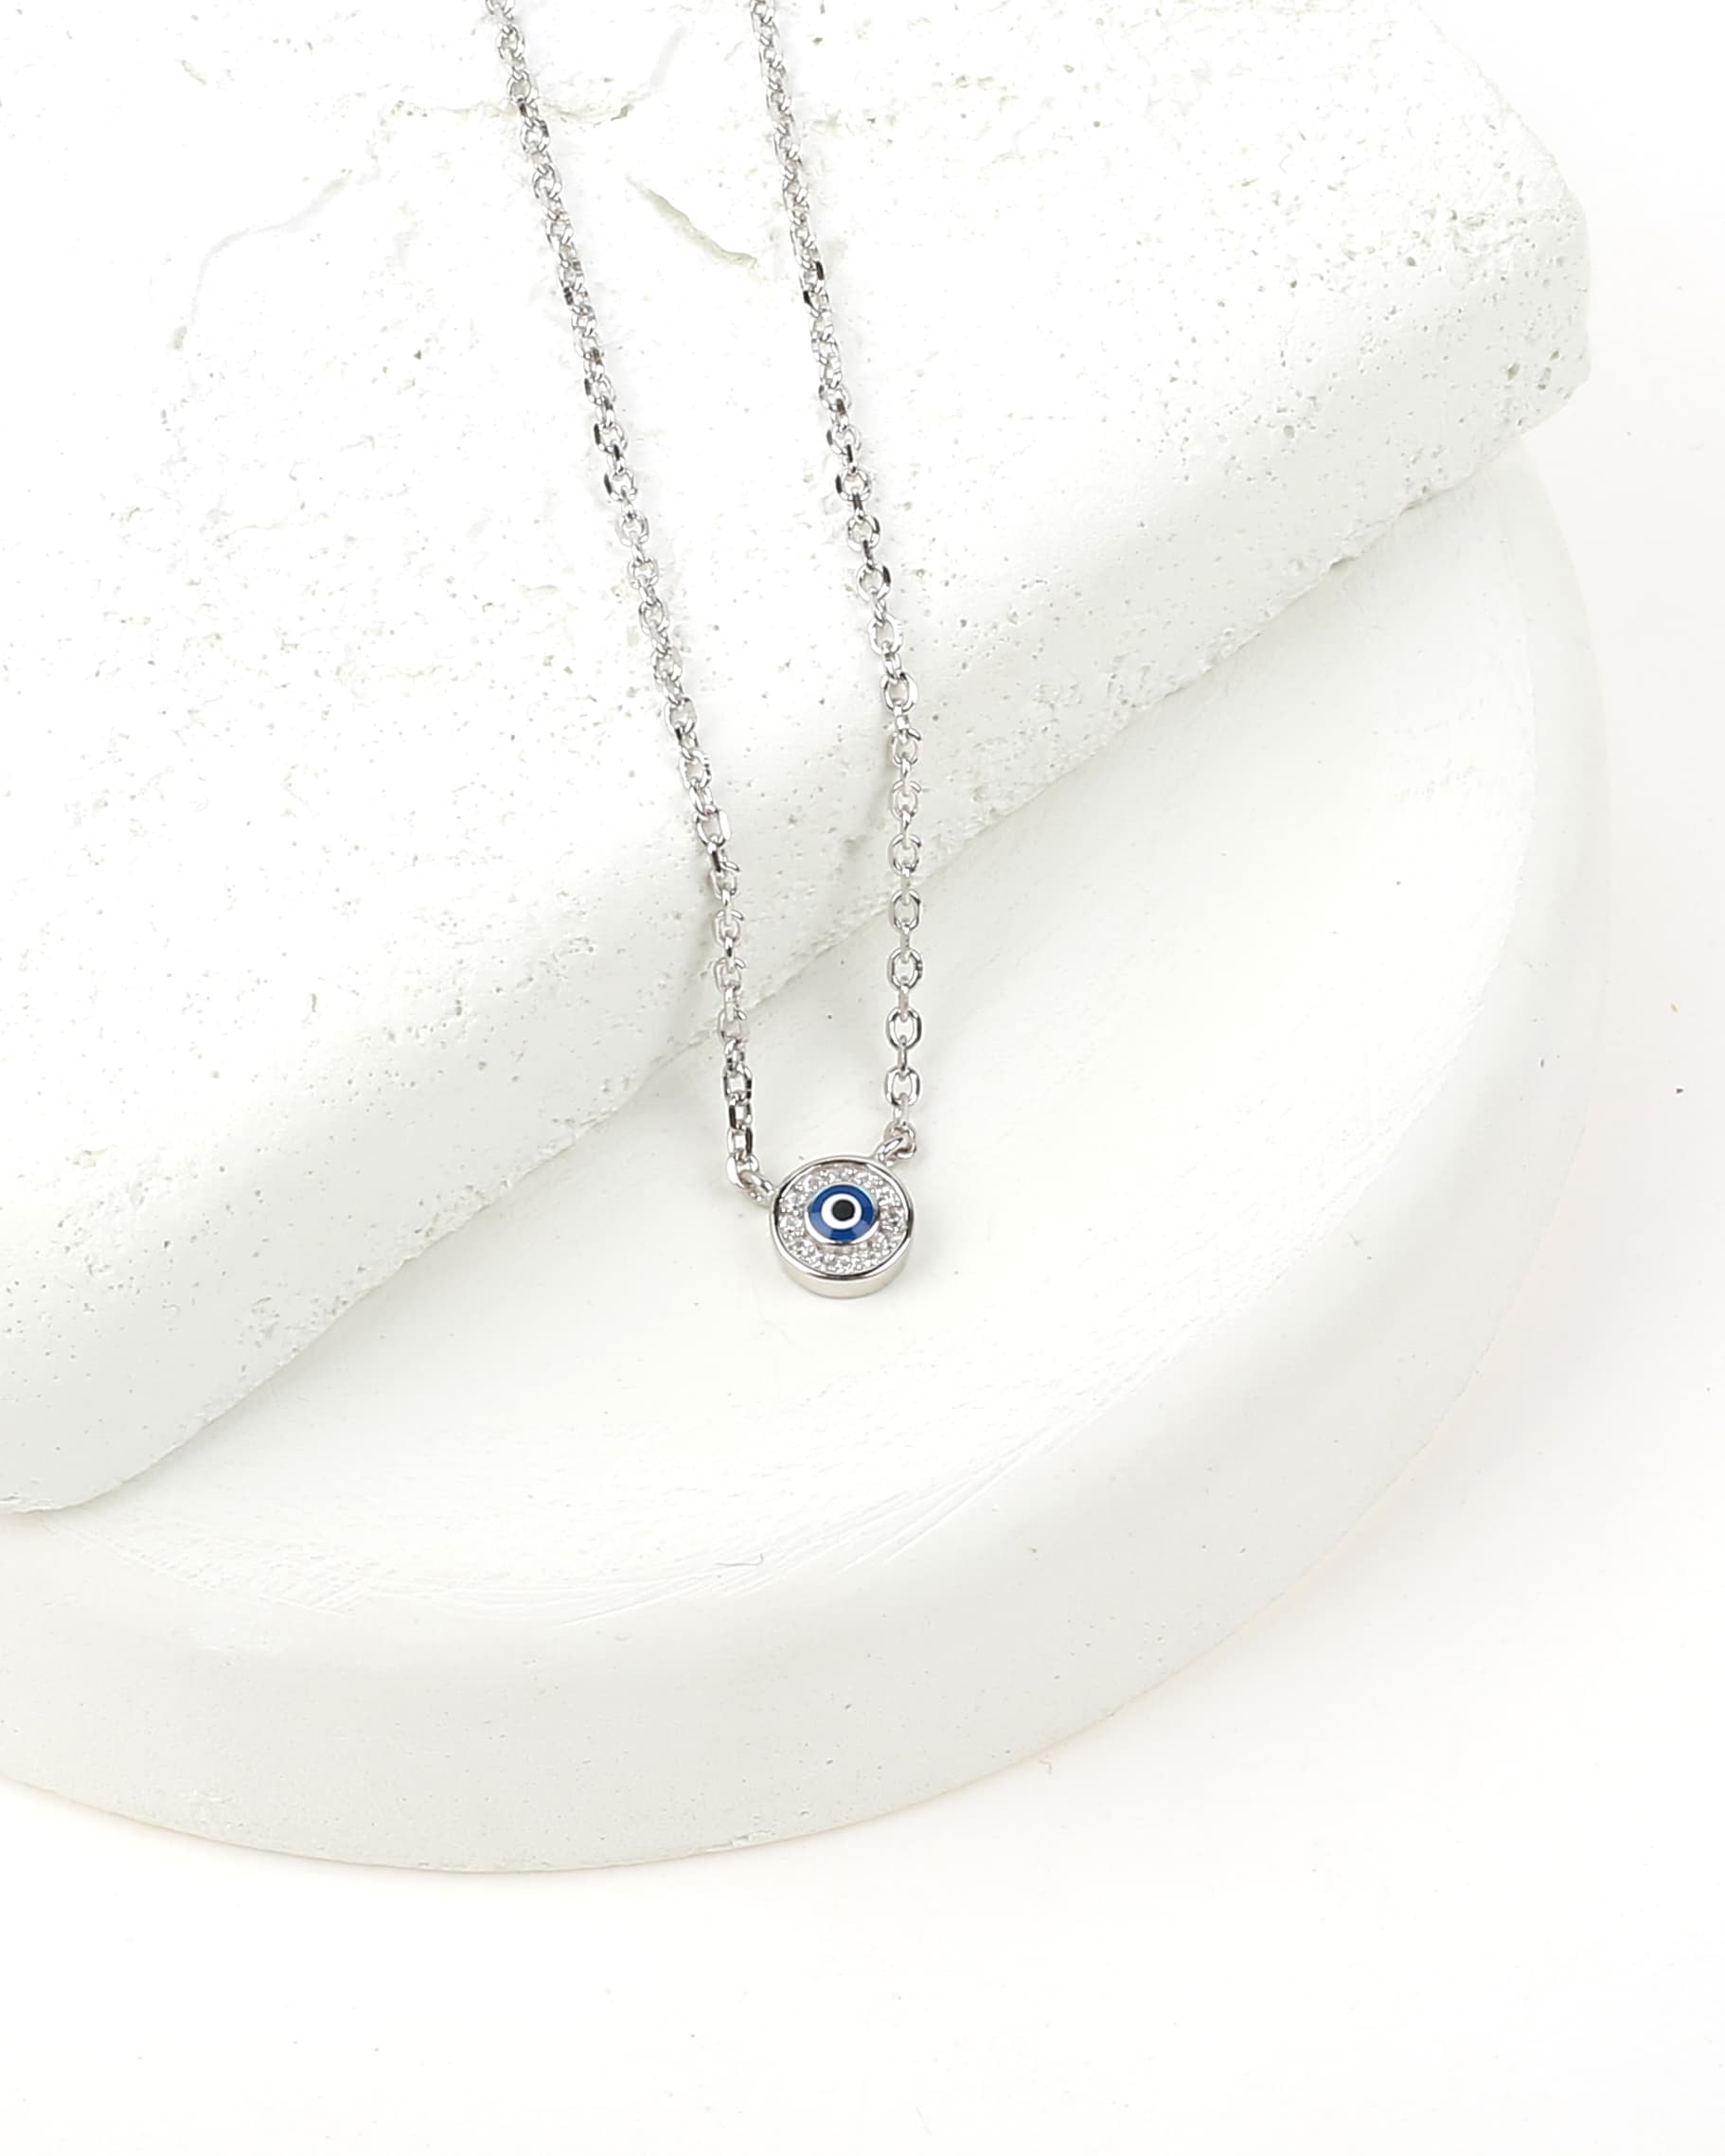 round Evil Eye Zirconia 925 Sterling Silver Pendent and Chain with Zirconia stones